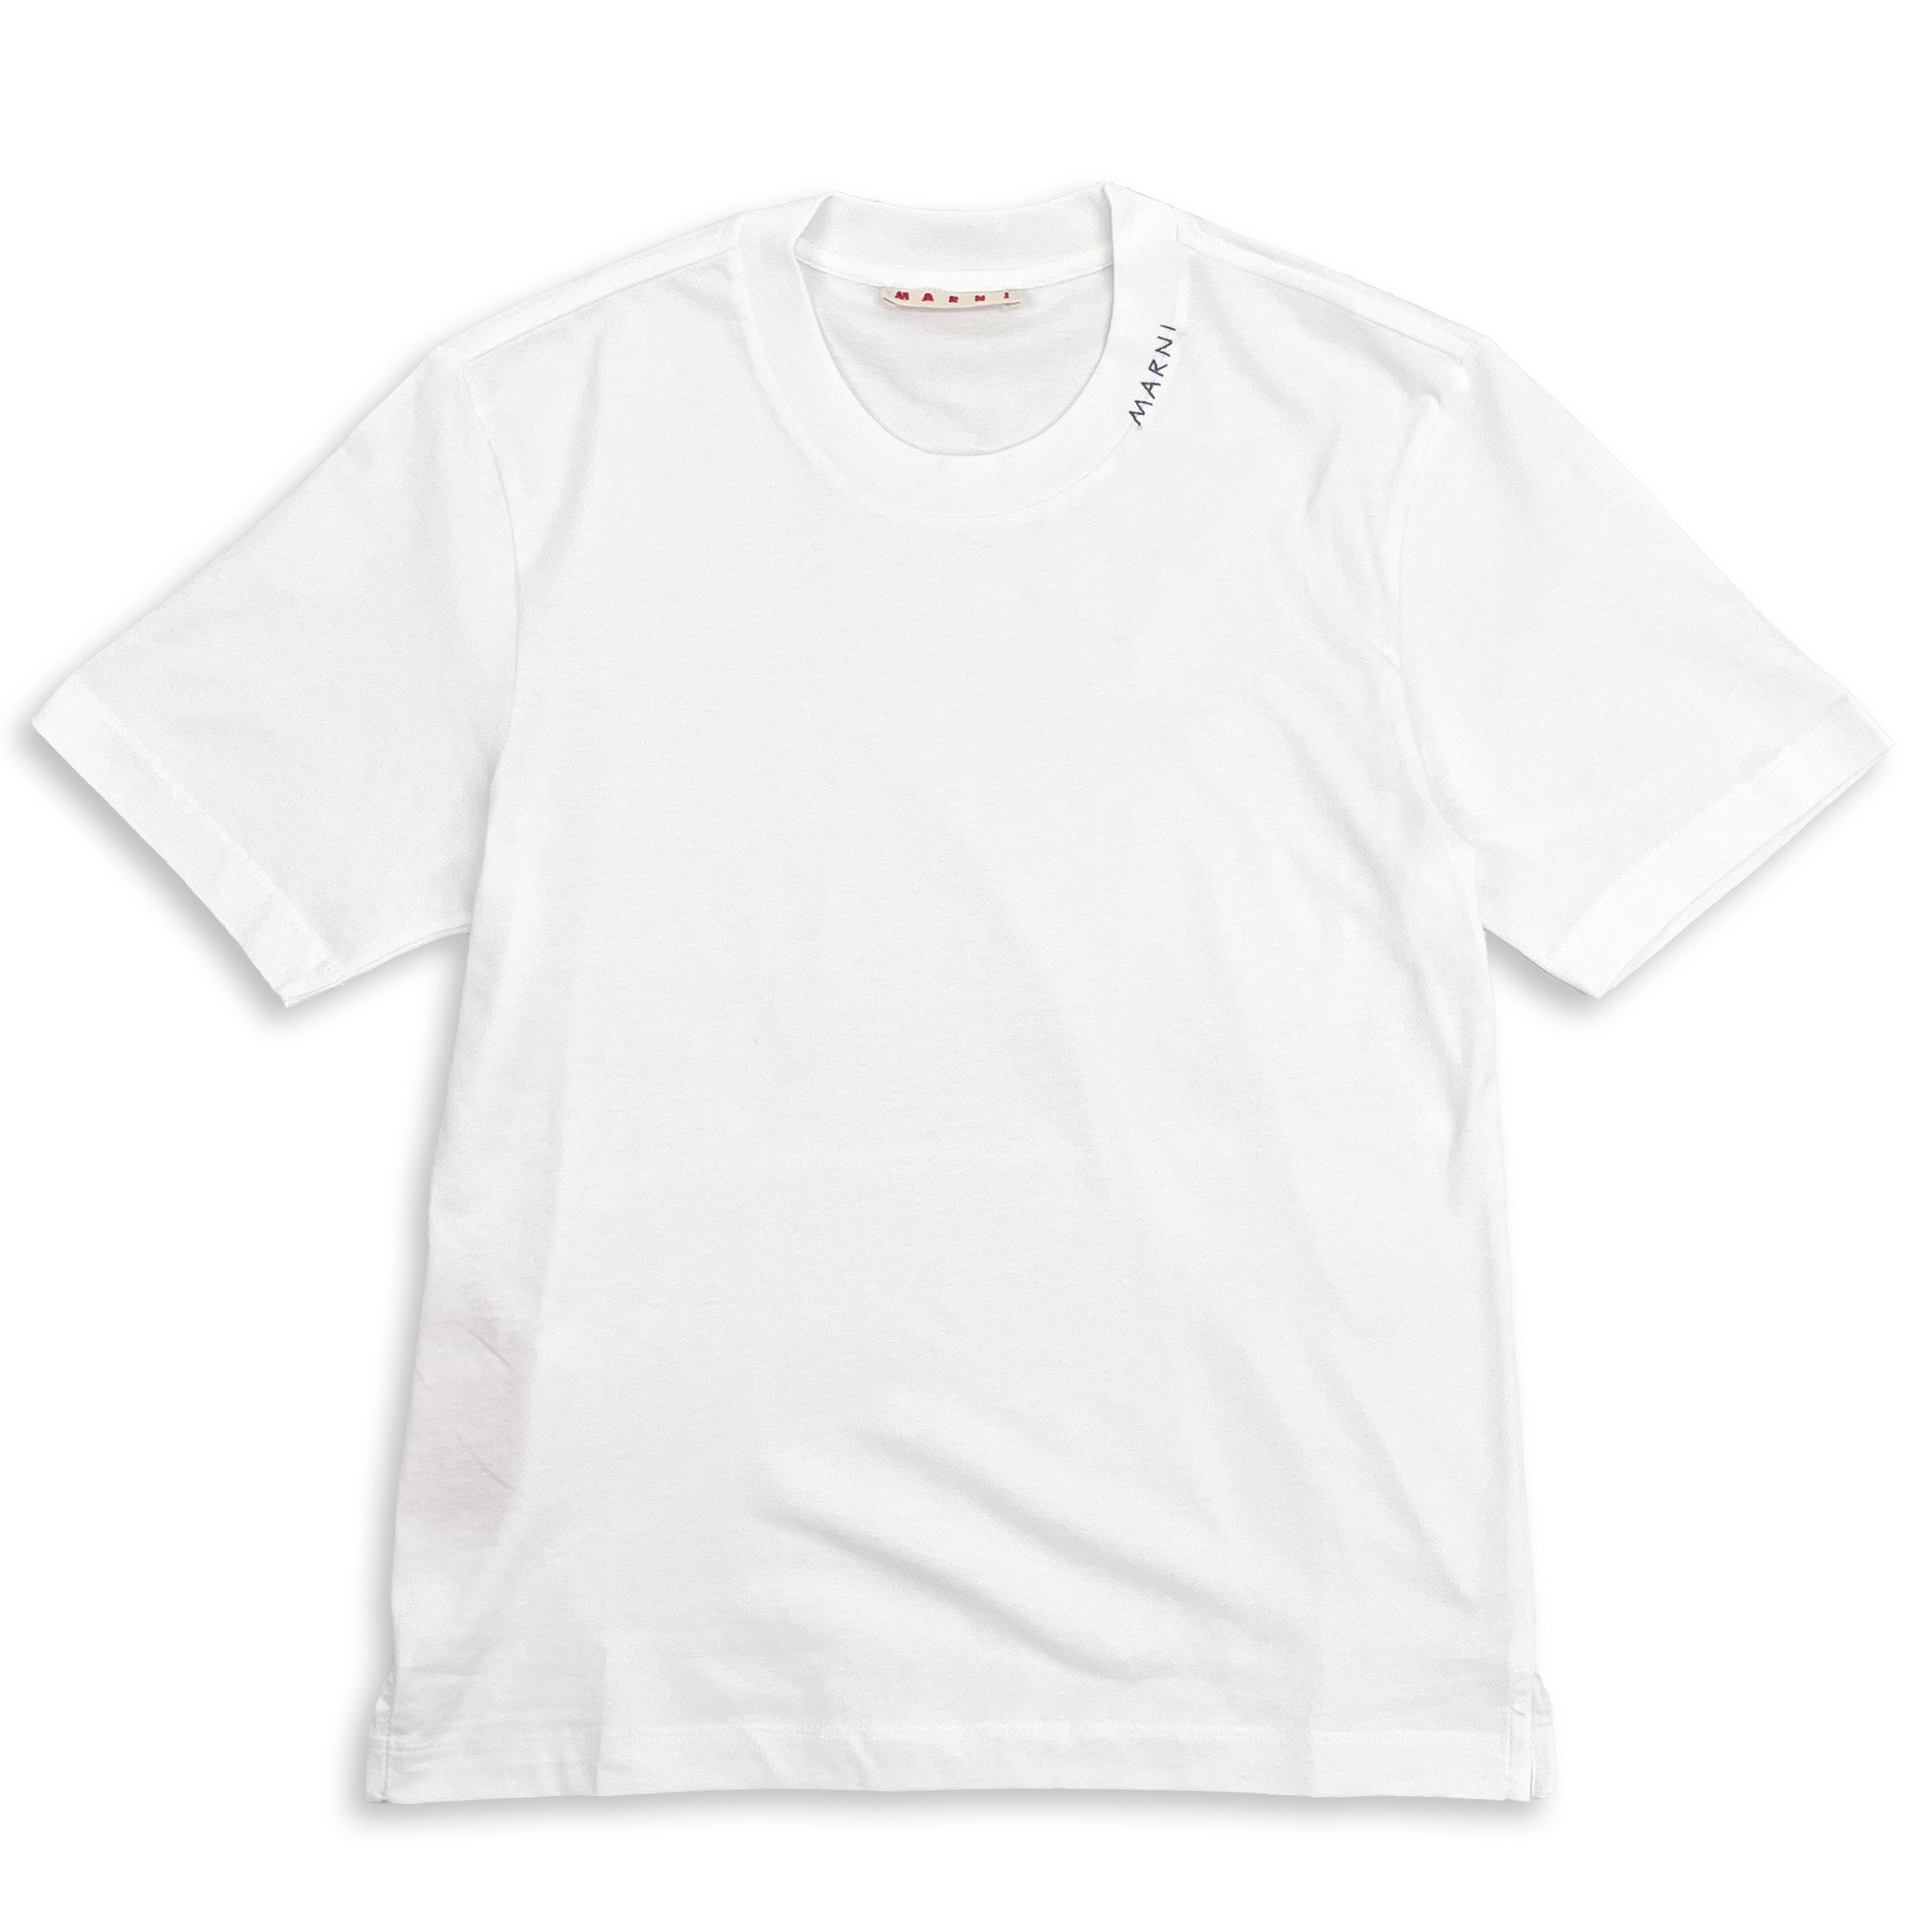 <img class='new_mark_img1' src='https://img.shop-pro.jp/img/new/icons7.gif' style='border:none;display:inline;margin:0px;padding:0px;width:auto;' />MARNI 3PACK T-SHIRT【WHITE&PINK&NAVY】